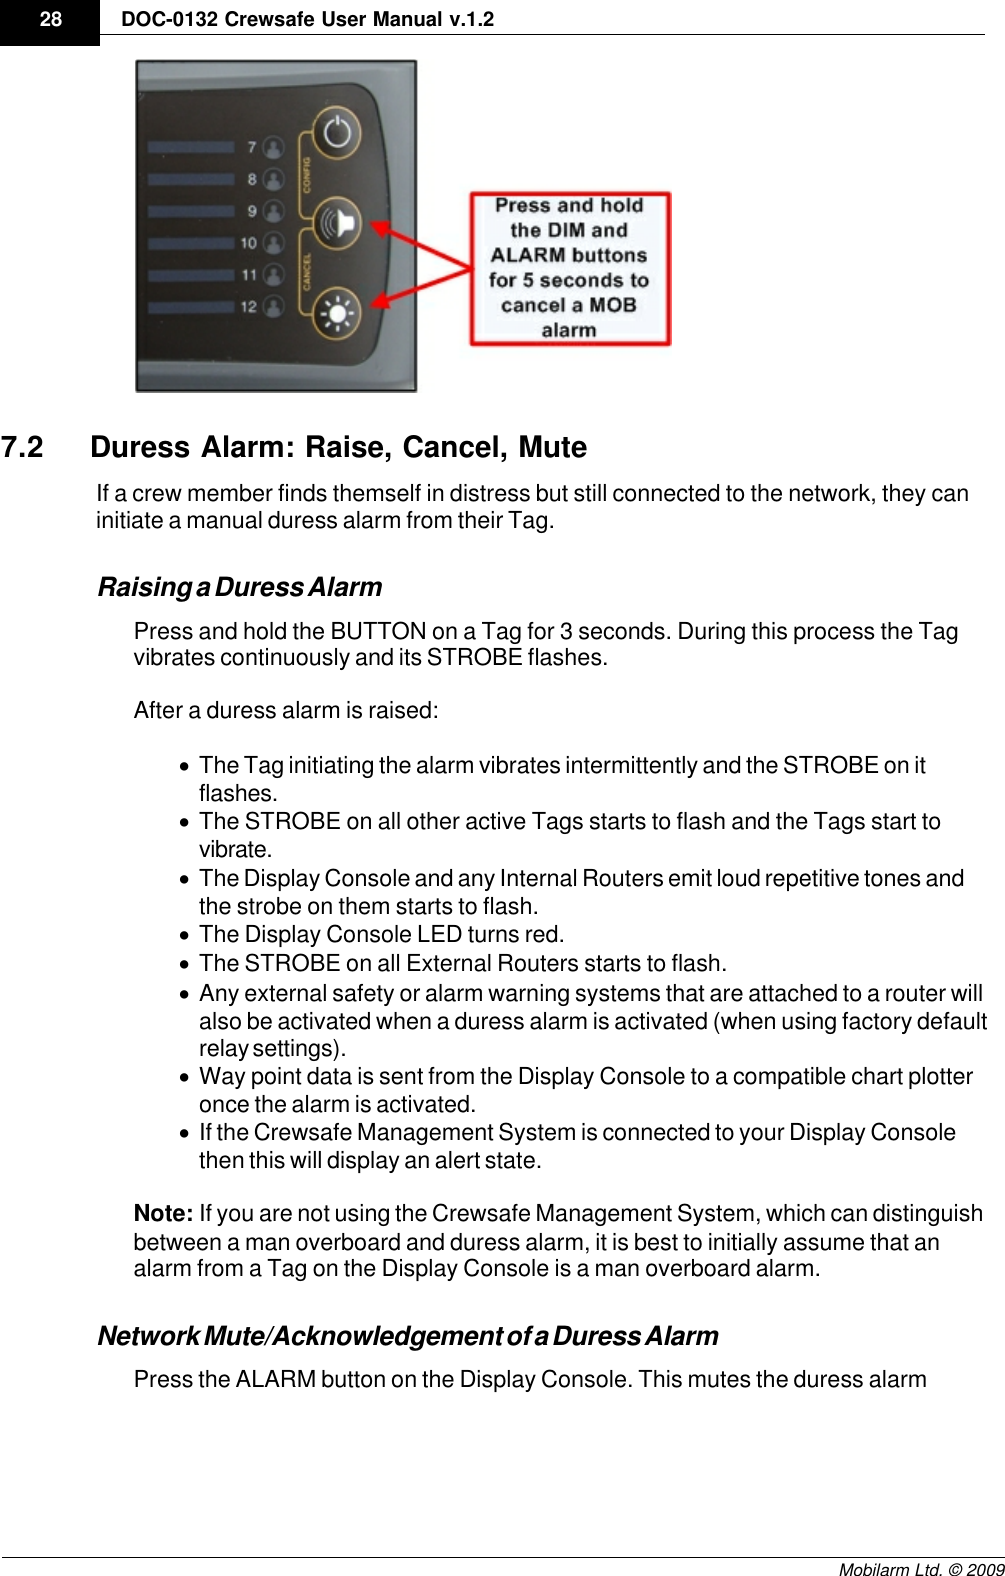 Draft28 DOC-0132 Crewsafe User Manual v.1.2Mobilarm Ltd. © 20097.2 Duress Alarm: Raise, Cancel, MuteIf a crew member finds themself in distress but still connected to the network, they caninitiate a manual duress alarm from their Tag. Raising a Duress AlarmPress and hold the BUTTON on a Tag for 3 seconds. During this process the Tagvibrates continuously and its STROBE flashes. After a duress alarm is raised:·The Tag initiating the alarm vibrates intermittently and the STROBE on itflashes.·The STROBE on all other active Tags starts to flash and the Tags start tovibrate.·The Display Console and any Internal Routers emit loud repetitive tones andthe strobe on them starts to flash.·The Display Console LED turns red.·The STROBE on all External Routers starts to flash.·Any external safety or alarm warning systems that are attached to a router willalso be activated when a duress alarm is activated (when using factory defaultrelay settings). ·Way point data is sent from the Display Console to a compatible chart plotteronce the alarm is activated.·If the Crewsafe Management System is connected to your Display Consolethen this will display an alert state.Note: If you are not using the Crewsafe Management System, which can distinguishbetween a man overboard and duress alarm, it is best to initially assume that analarm from a Tag on the Display Console is a man overboard alarm. Network Mute/Acknowledgement of a Duress AlarmPress the ALARM button on the Display Console. This mutes the duress alarm